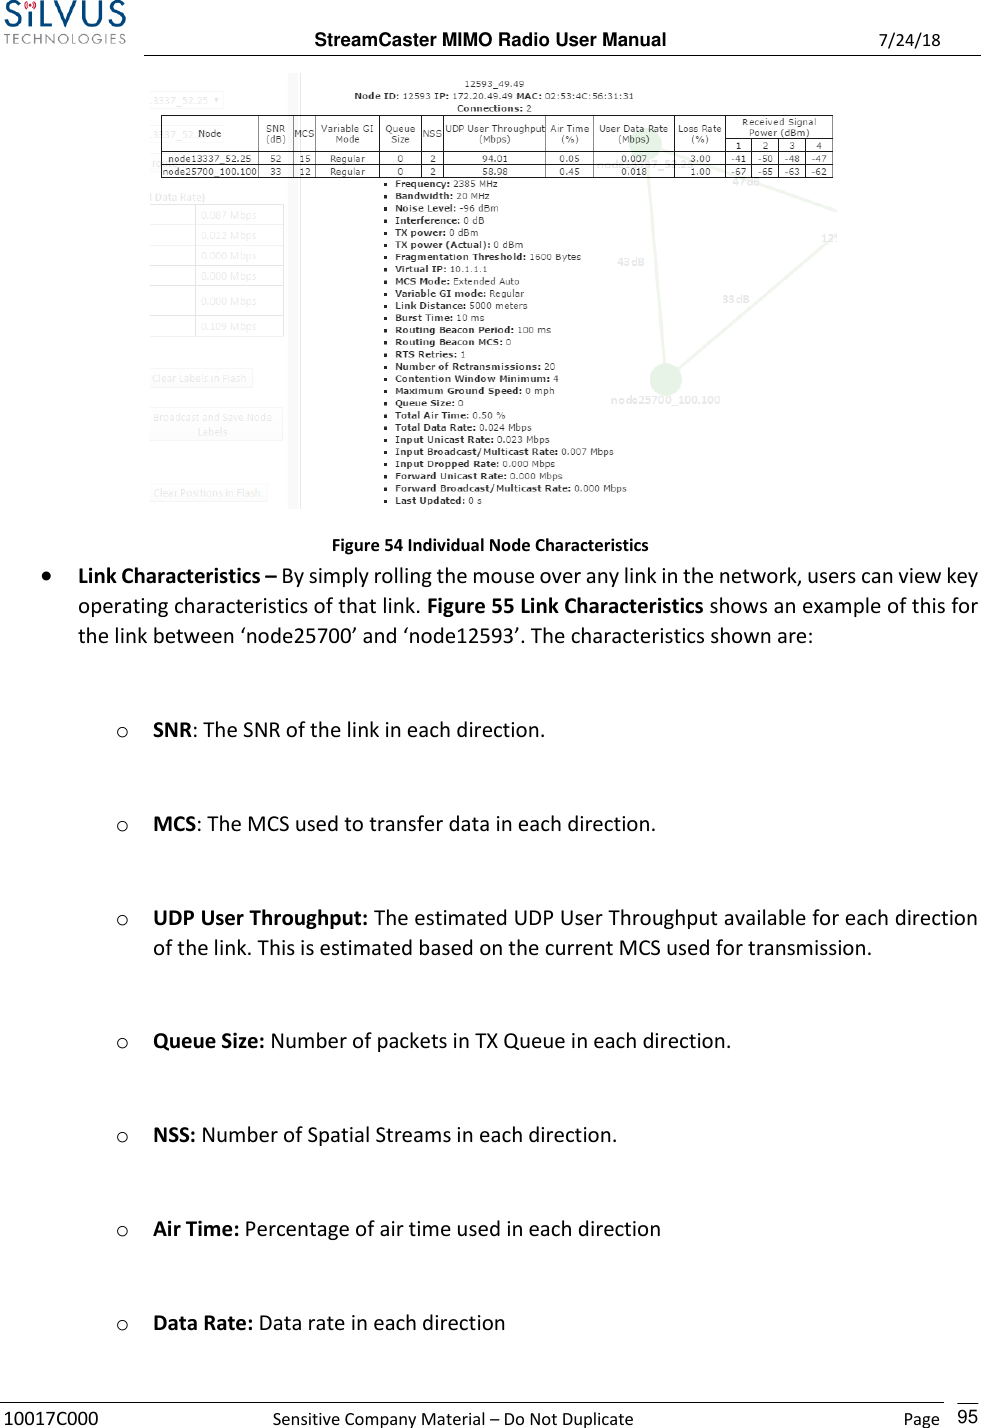  StreamCaster MIMO Radio User Manual  7/24/18 10017C000  Sensitive Company Material – Do Not Duplicate    Page    95   Figure 54 Individual Node Characteristics  • Link Characteristics – By simply rolling the mouse over any link in the network, users can view key operating characteristics of that link. Figure 55 Link Characteristics shows an example of this for the link between ‘node25700’ and ‘node12593’. The characteristics shown are:  o SNR: The SNR of the link in each direction.  o MCS: The MCS used to transfer data in each direction.  o UDP User Throughput: The estimated UDP User Throughput available for each direction of the link. This is estimated based on the current MCS used for transmission.  o Queue Size: Number of packets in TX Queue in each direction.  o NSS: Number of Spatial Streams in each direction.  o Air Time: Percentage of air time used in each direction  o Data Rate: Data rate in each direction  